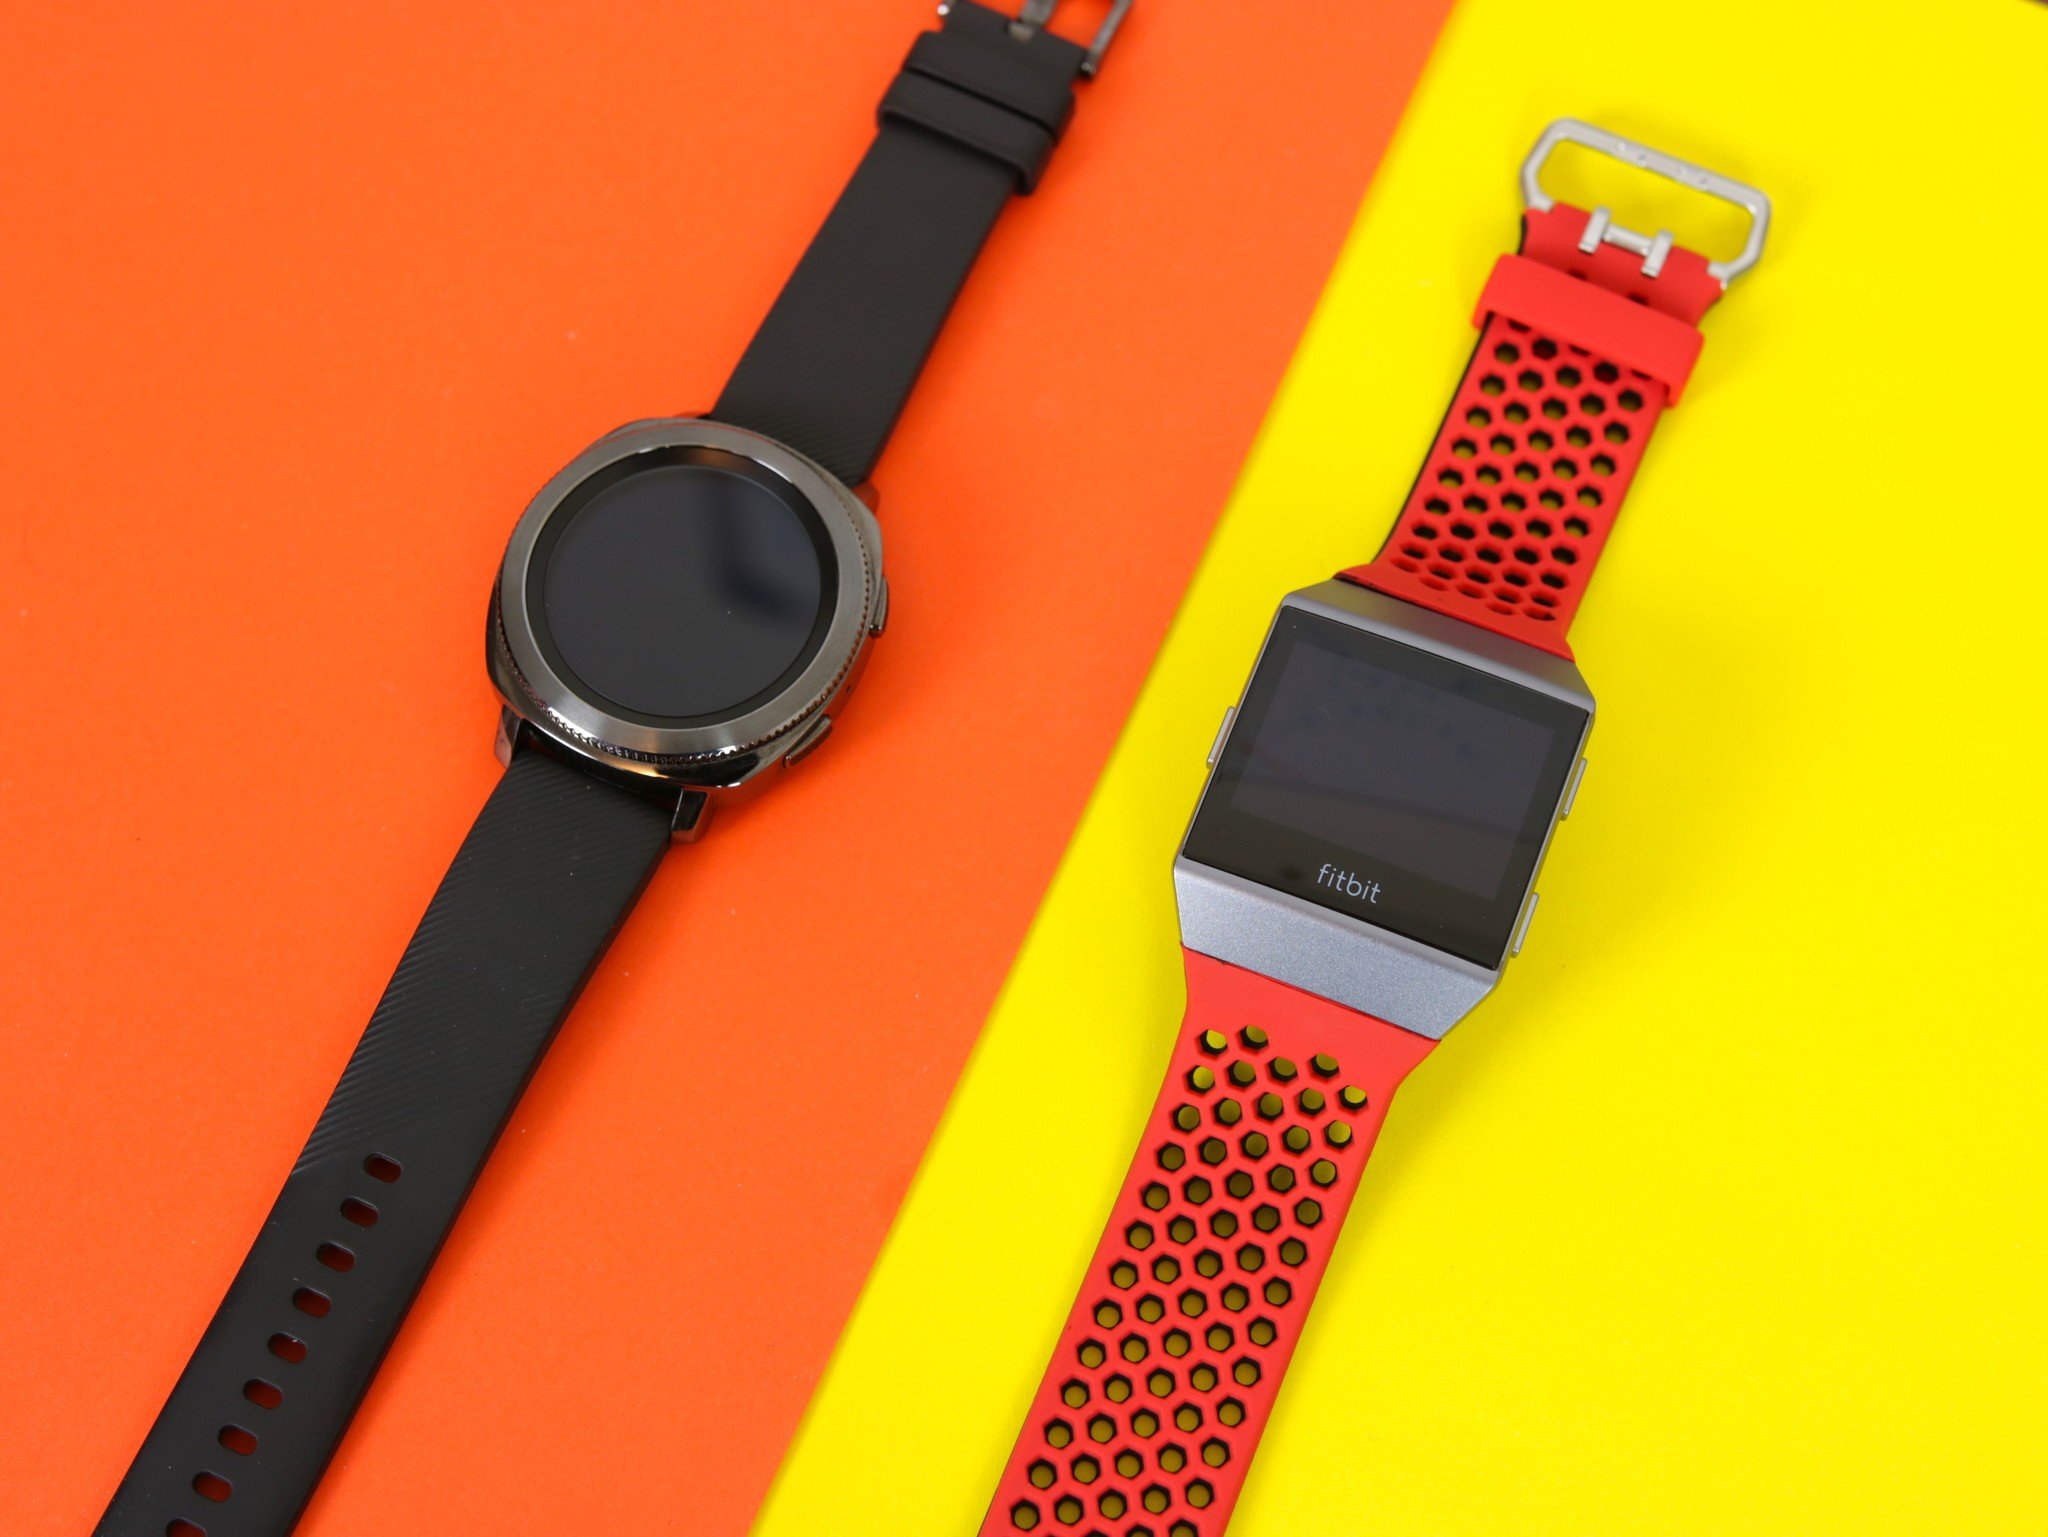 samsung galaxy watch active vs fitbit ionic